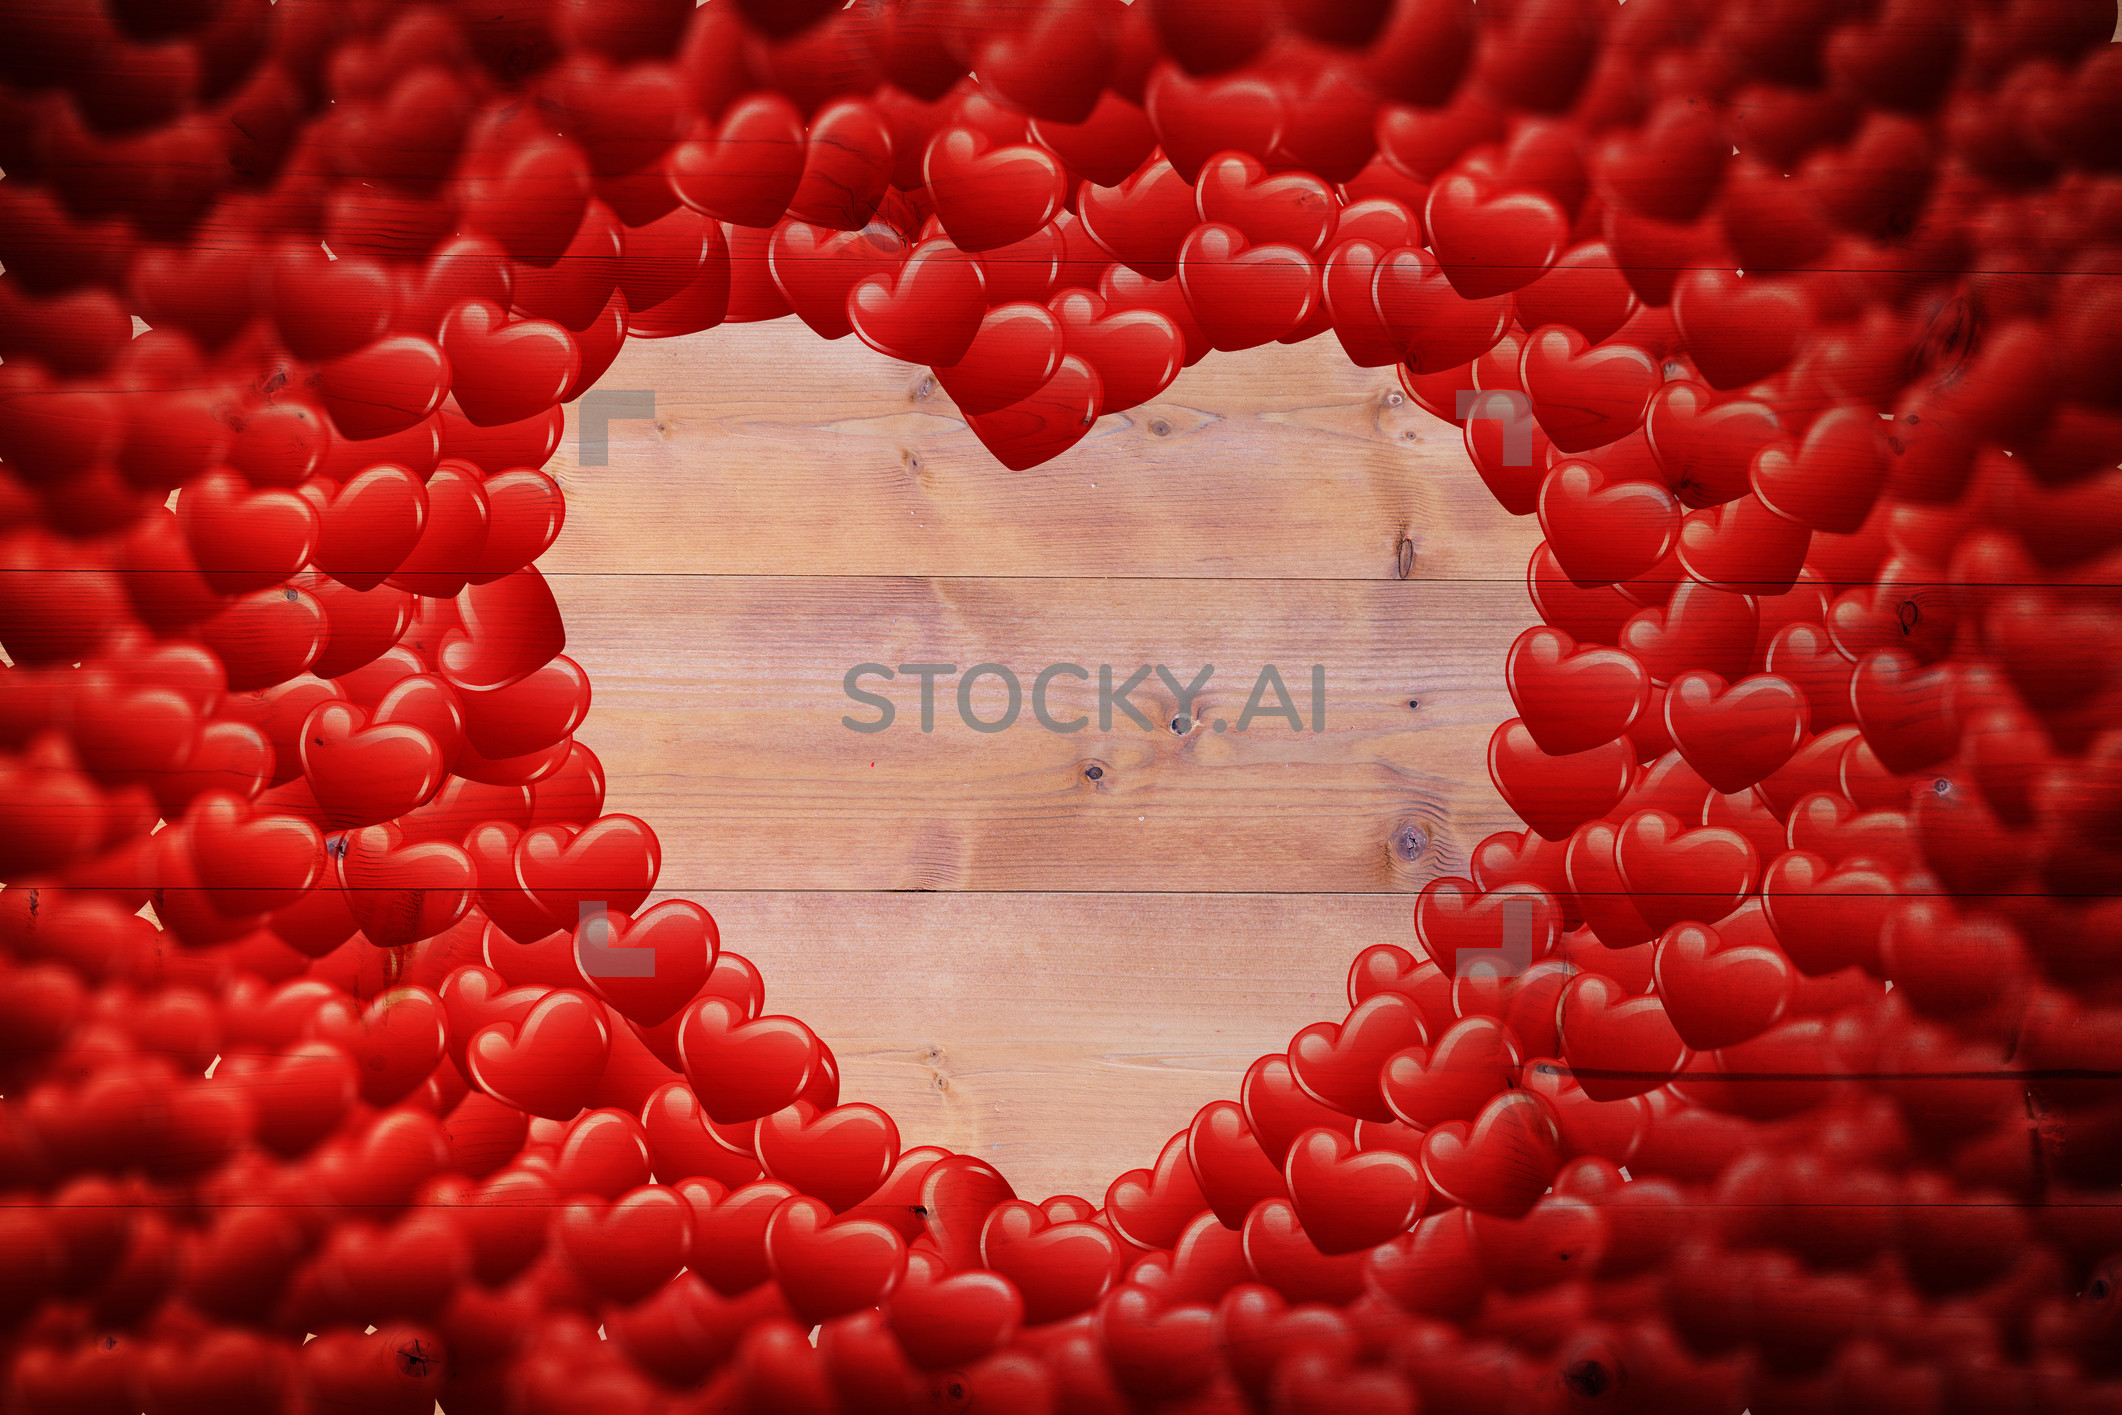 2122x1415 Image of Picture of Red love hearts against bleached wooden planks  background for use in digital